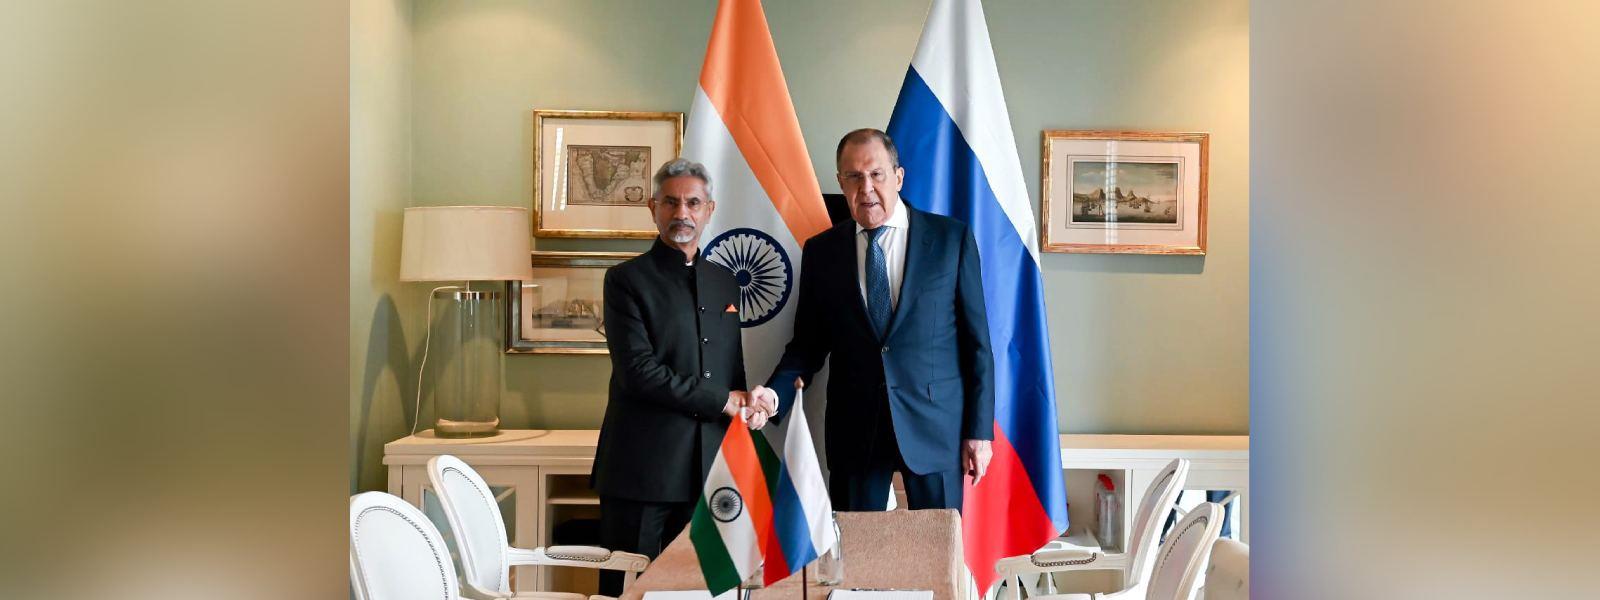 External Affairs Minister Dr. S. Jaishankar met H.E. Mr. Sergey Lavrov, Foreign Minister of Russia on the sidelines of BRICS FMM in Cape Town